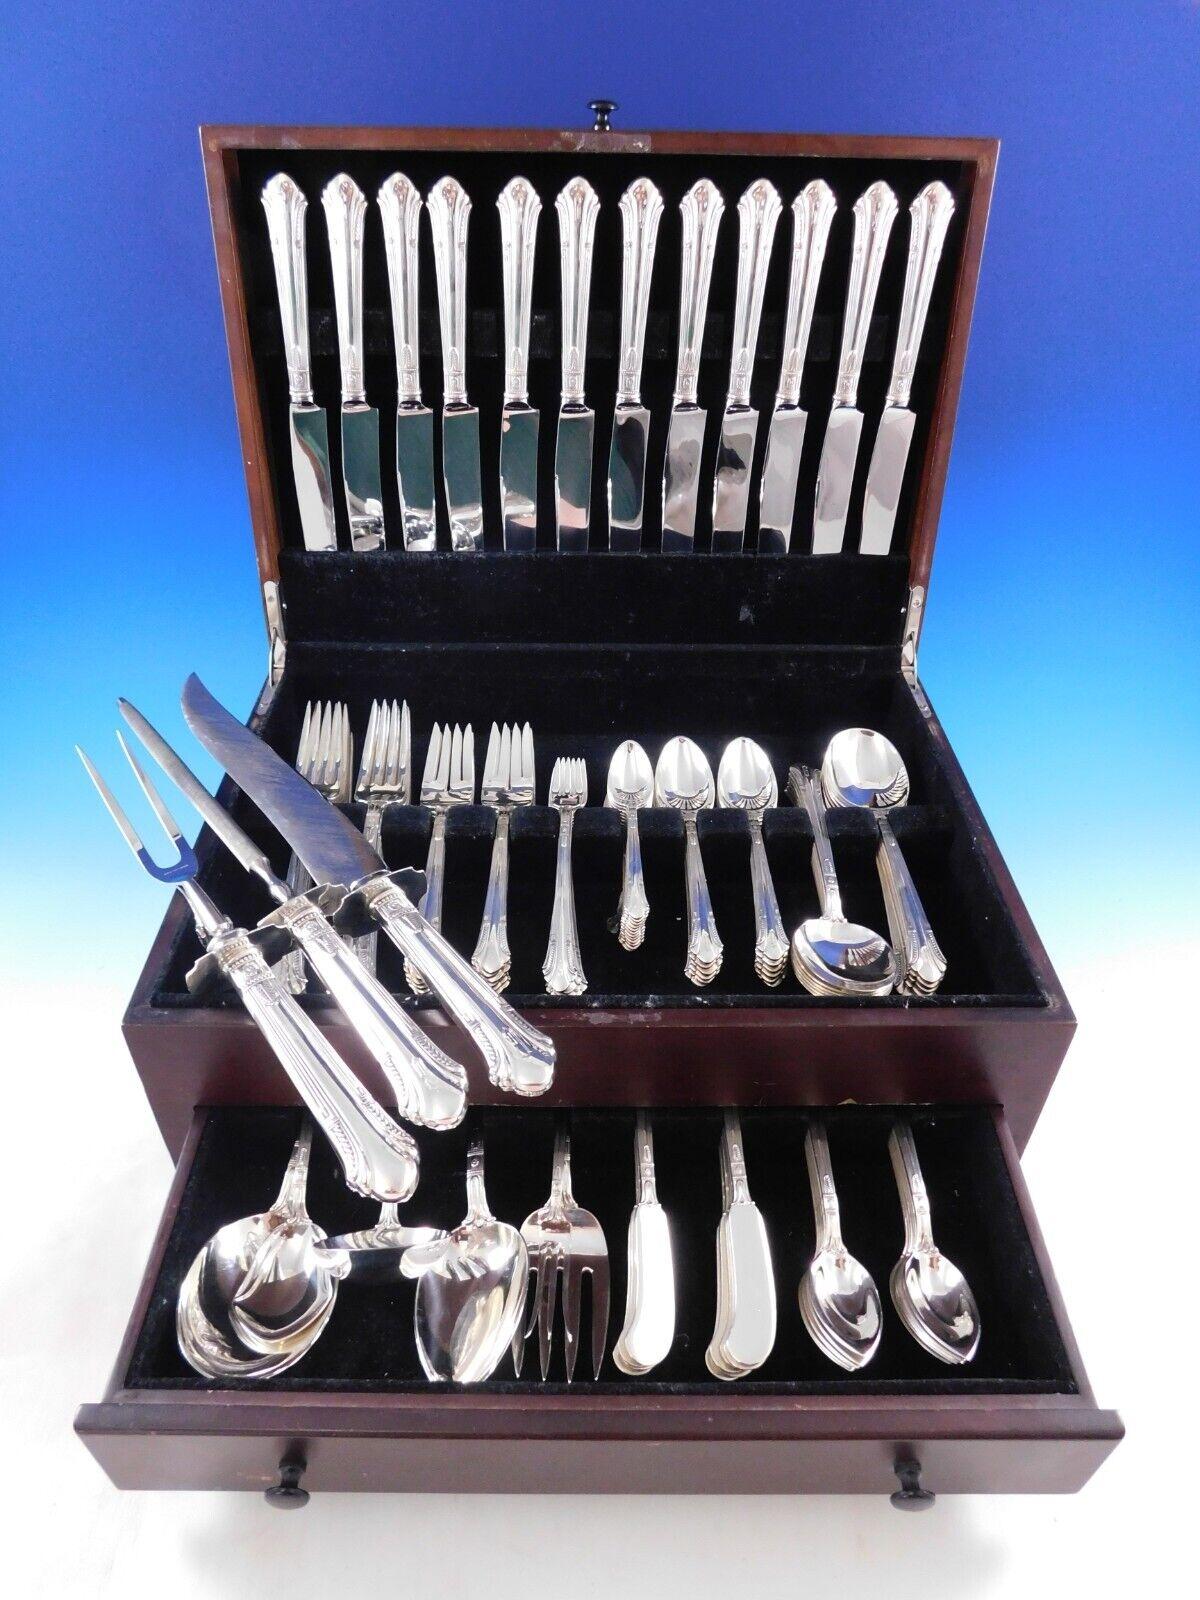 Scarce Dinner Size Shamrock V by Gorham sterling silver flatware set - 117 pieces. This pattern was the official pattern of the US Navy and was used on battleships by the high ranking officers and captain. Later, many officers requested this pattern